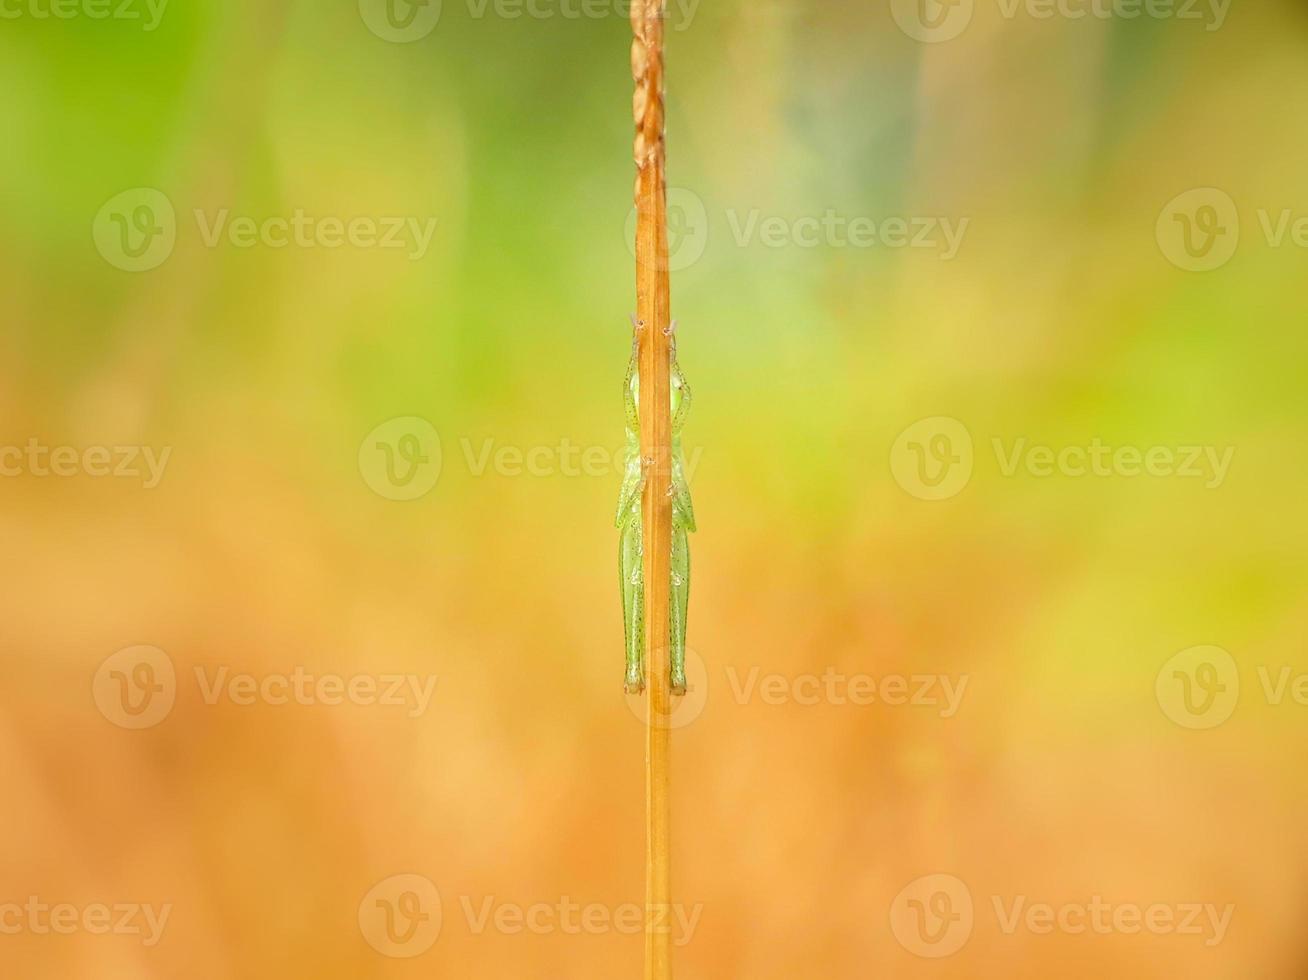 Grasshopper behind weeds against a natural background photo